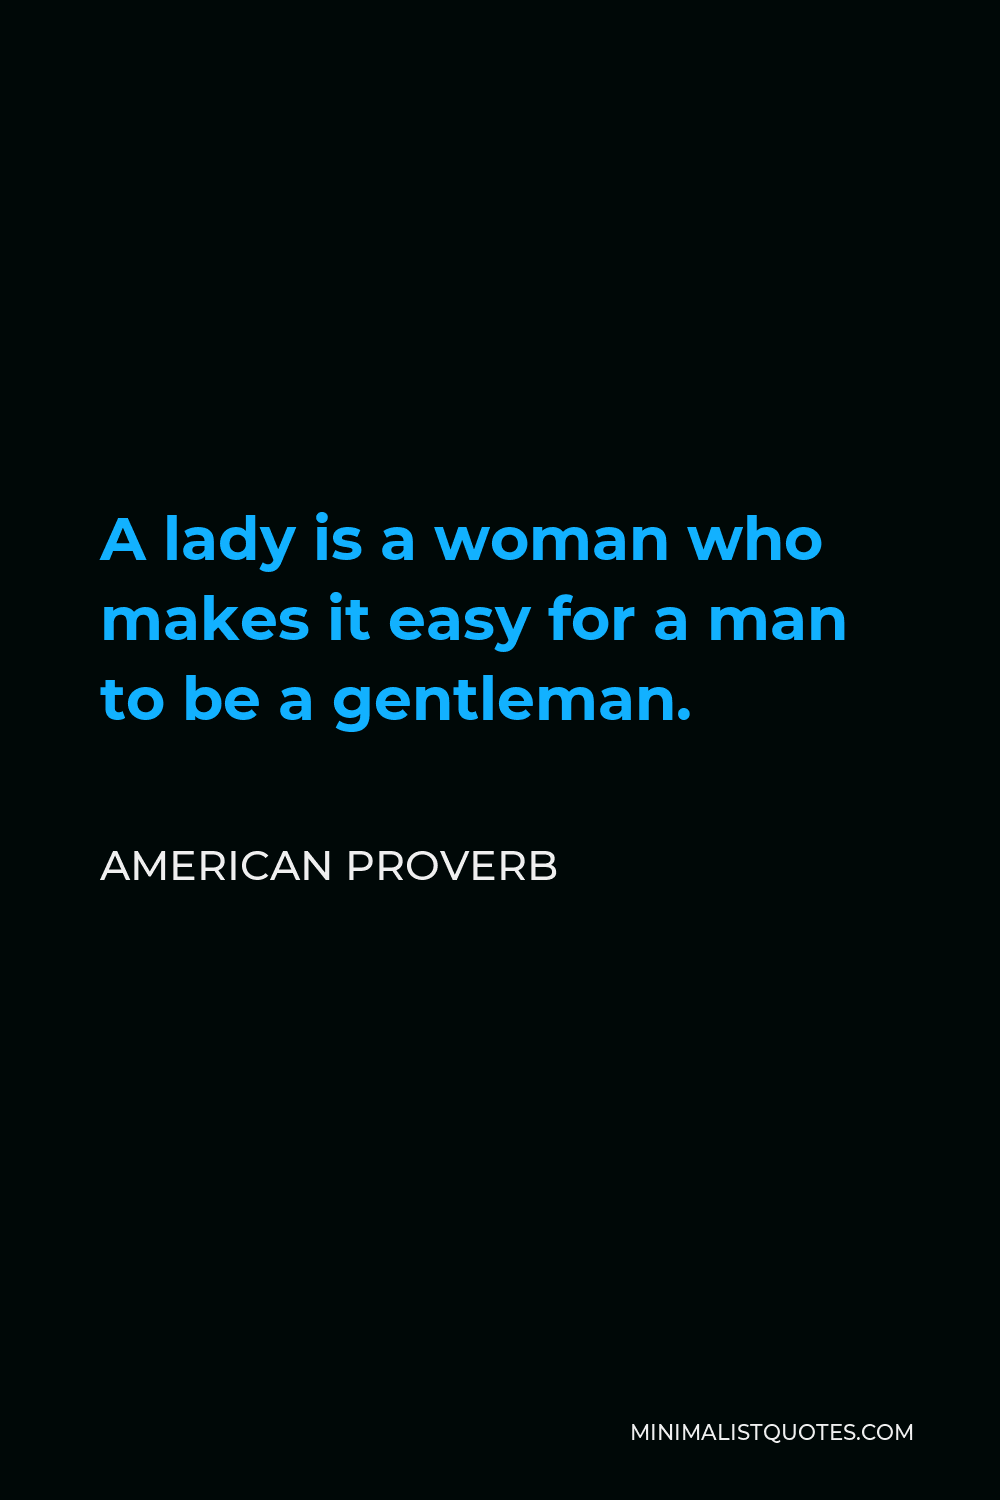 American Proverb Quote - A lady is a woman who makes it easy for a man to be a gentleman.